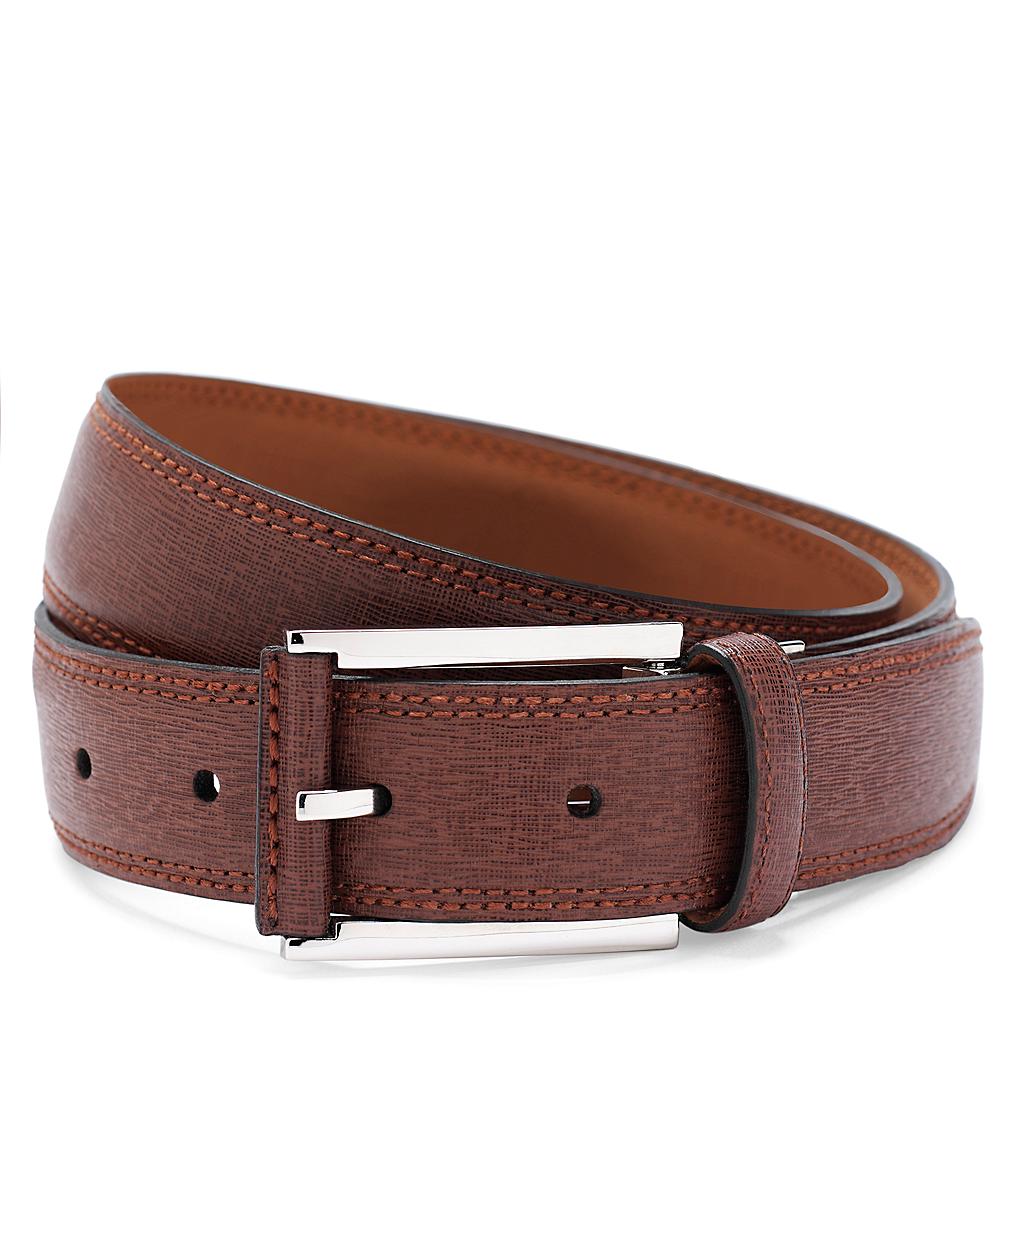 Lyst - Brooks Brothers Saffiano Leather Dress Belt in Brown for Men